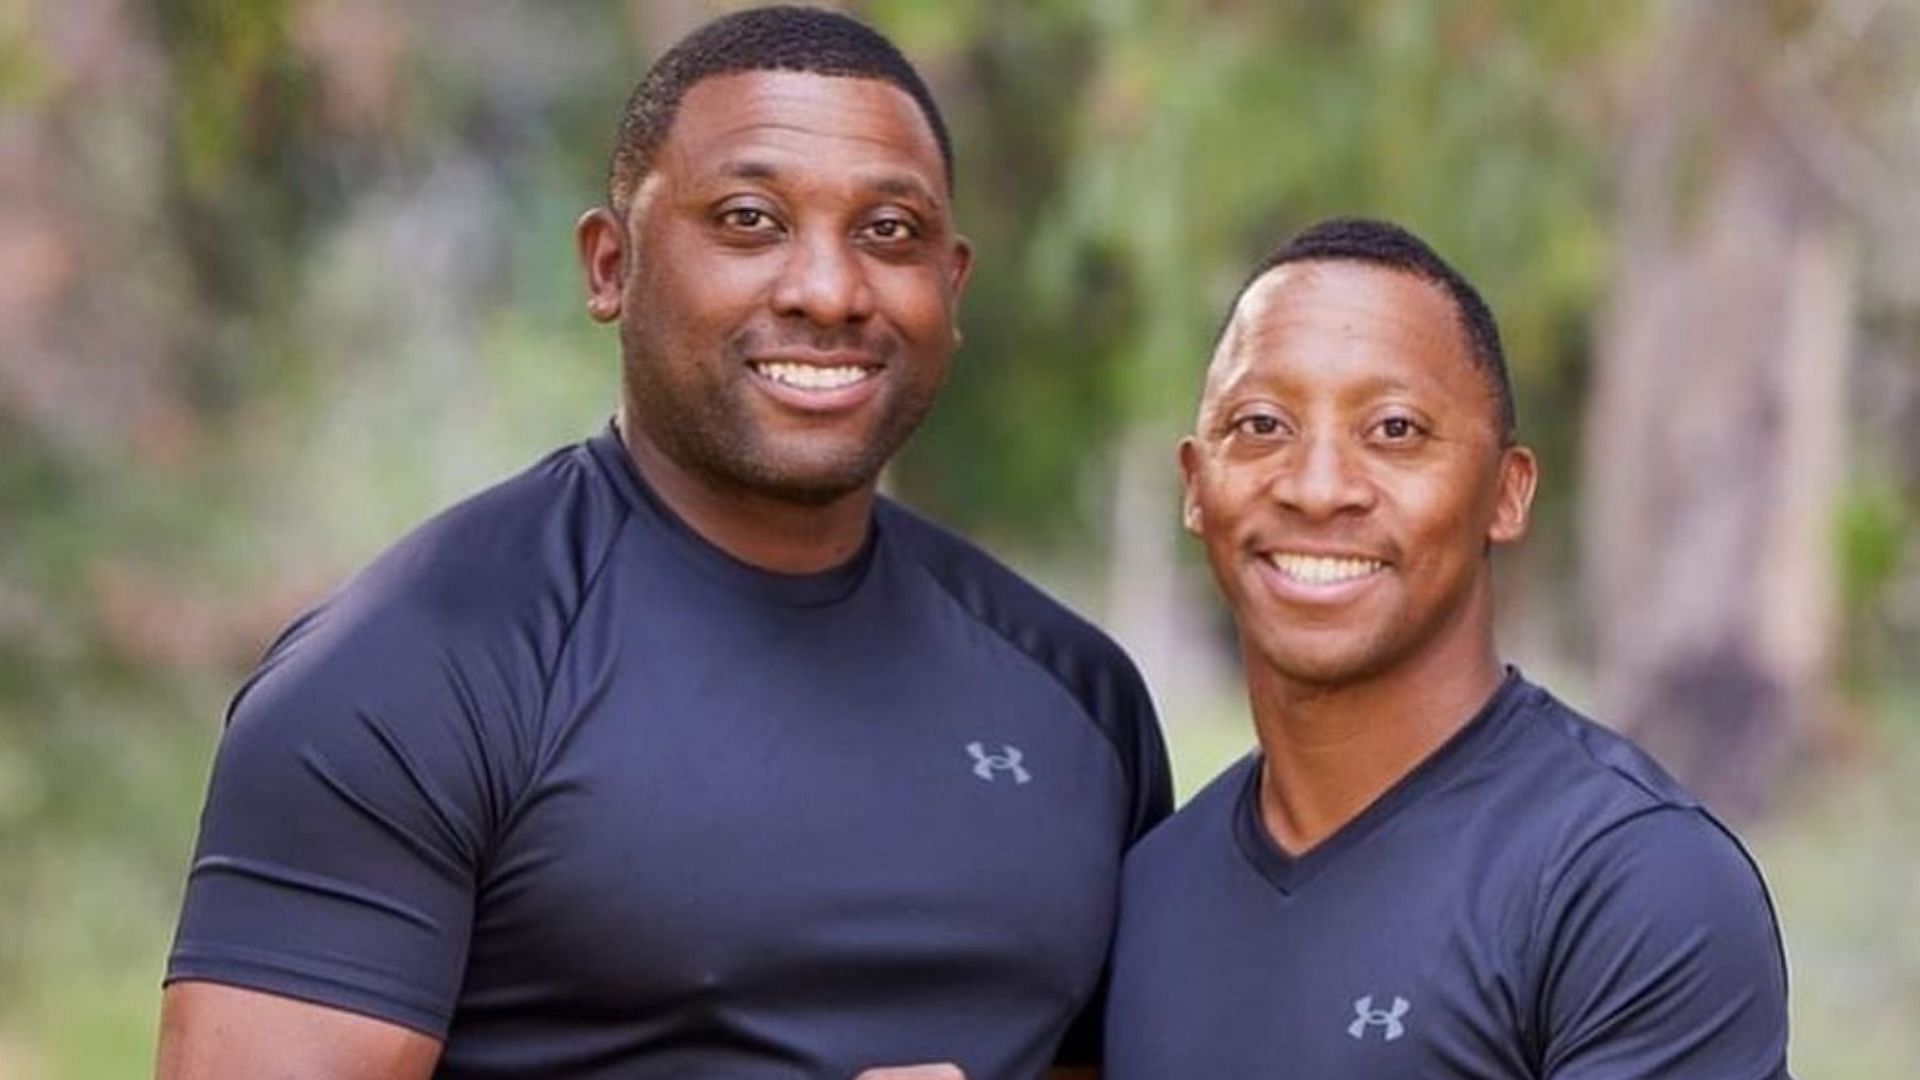 Military brothers to participate in The Amazing Race Season 34 airing Wednesday (Image via marcusdeshawncraig/Instagram)